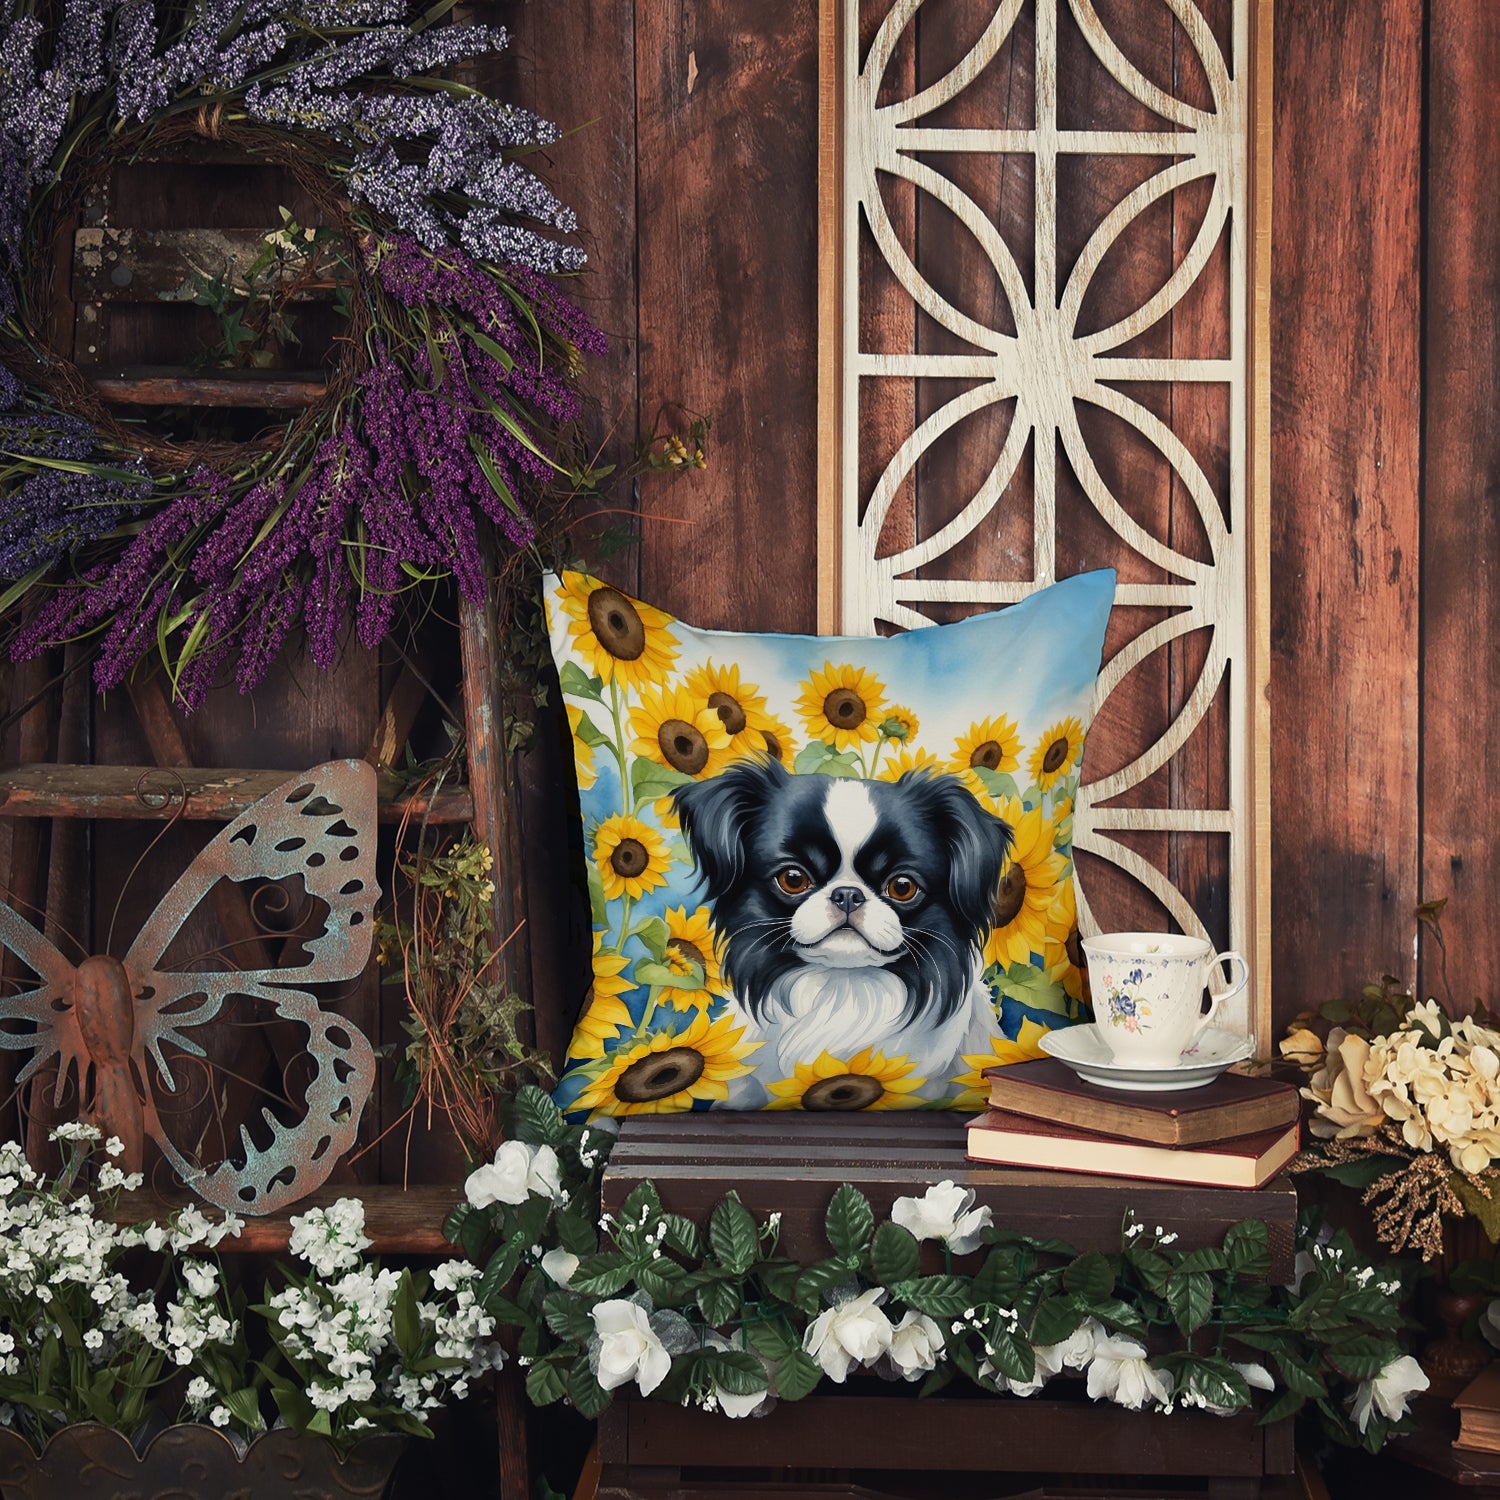 Japanese Chin in Sunflowers Throw Pillow